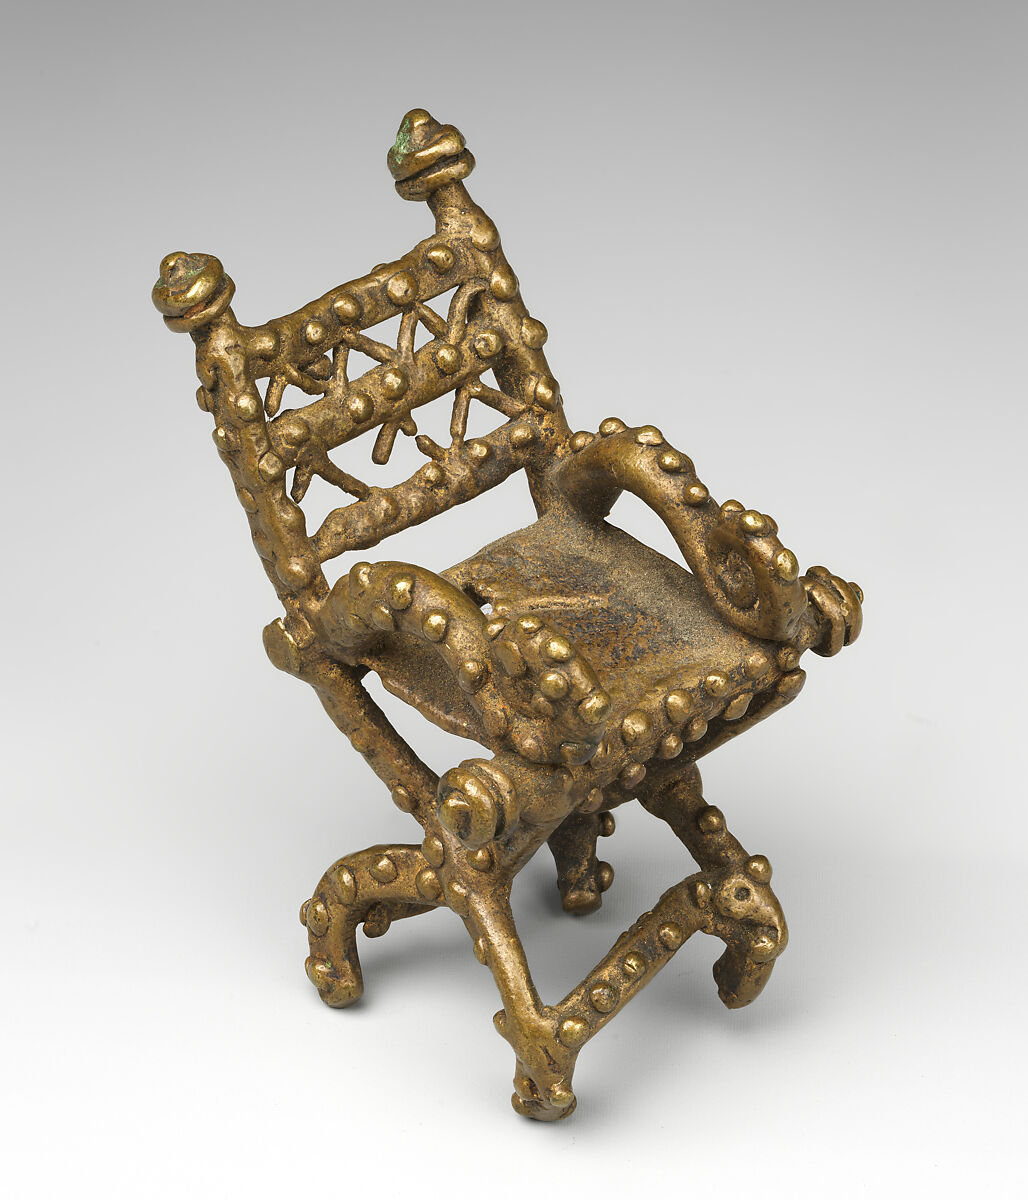 Gold Weight: Chair, Brass, Akan peoples 